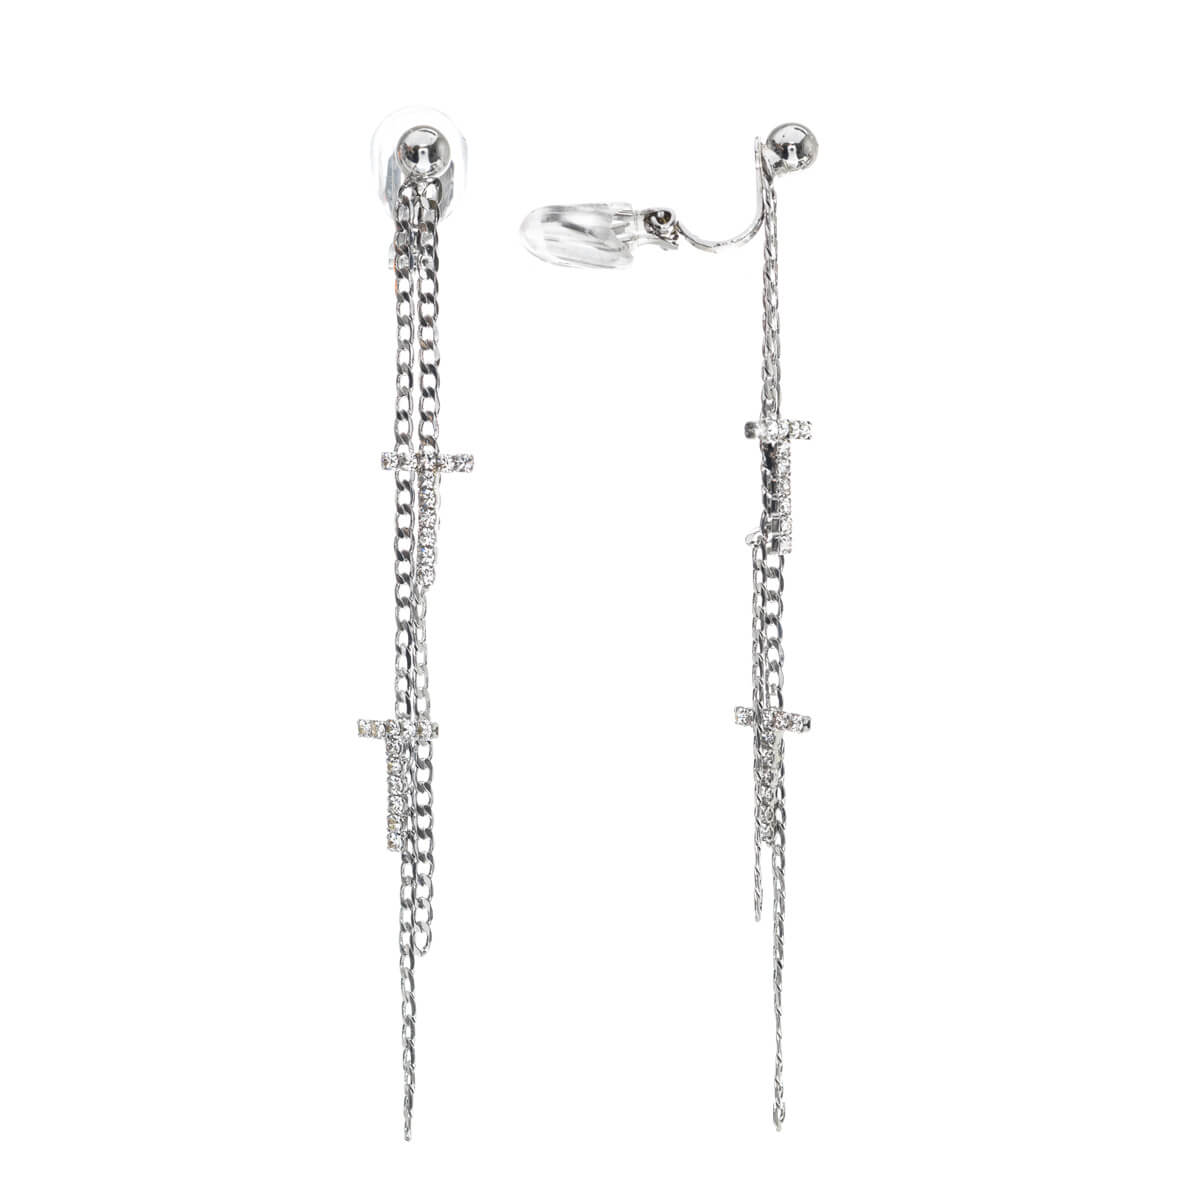 Hanging chain clip earrings with zirconia stones